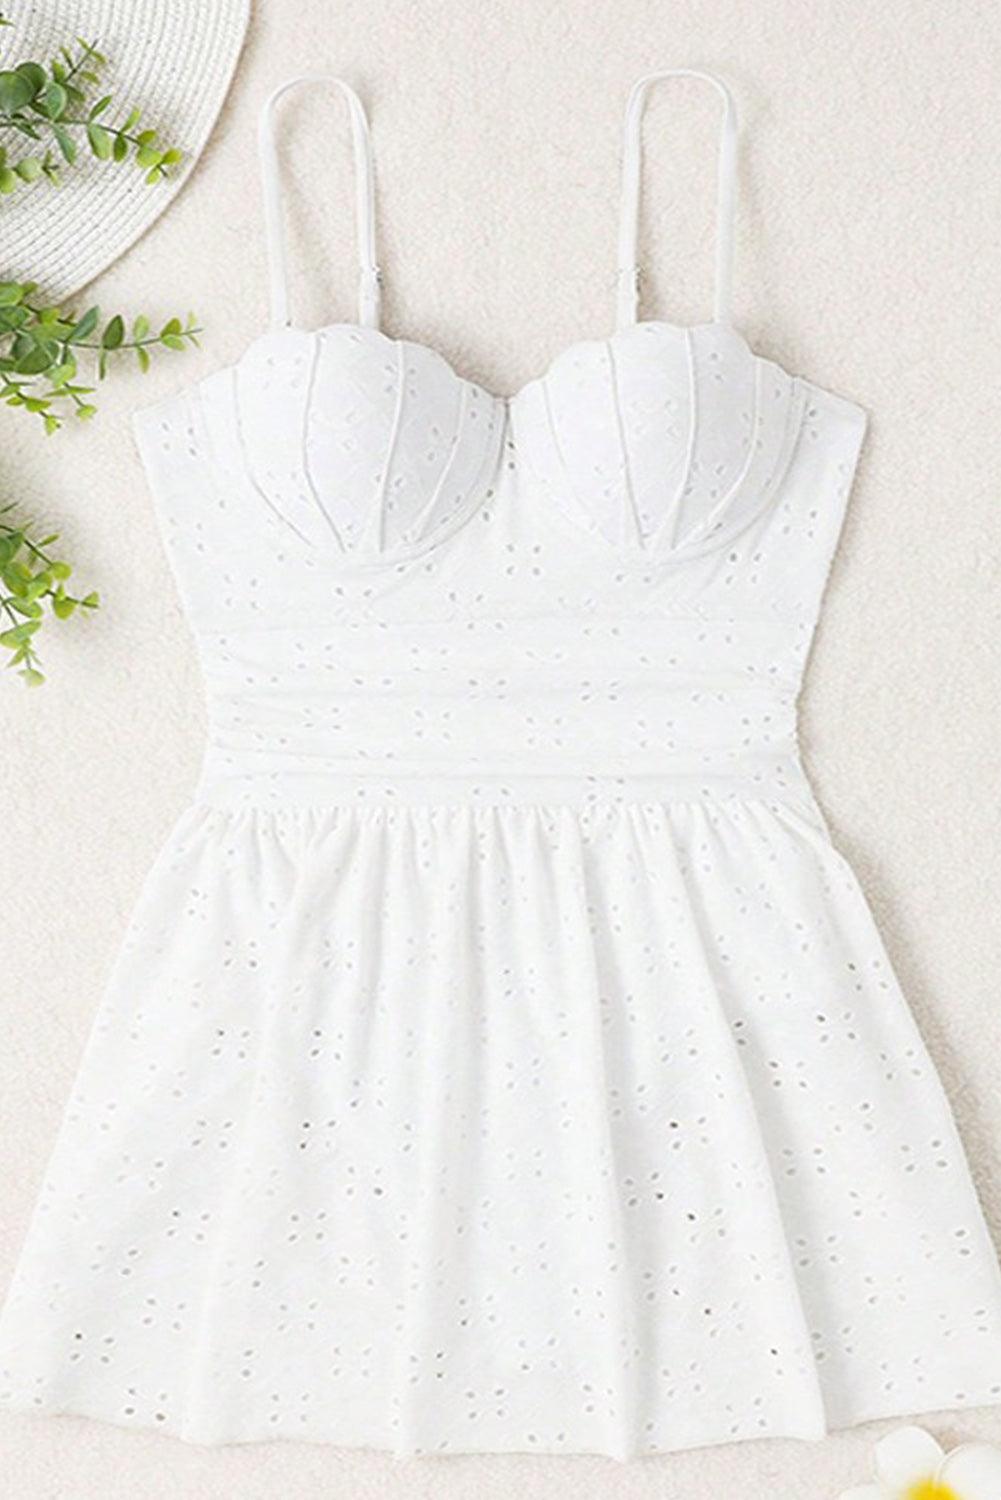 White Eyelet Padded Fit and Flare Two Piece Tankini Set - L & M Kee, LLC